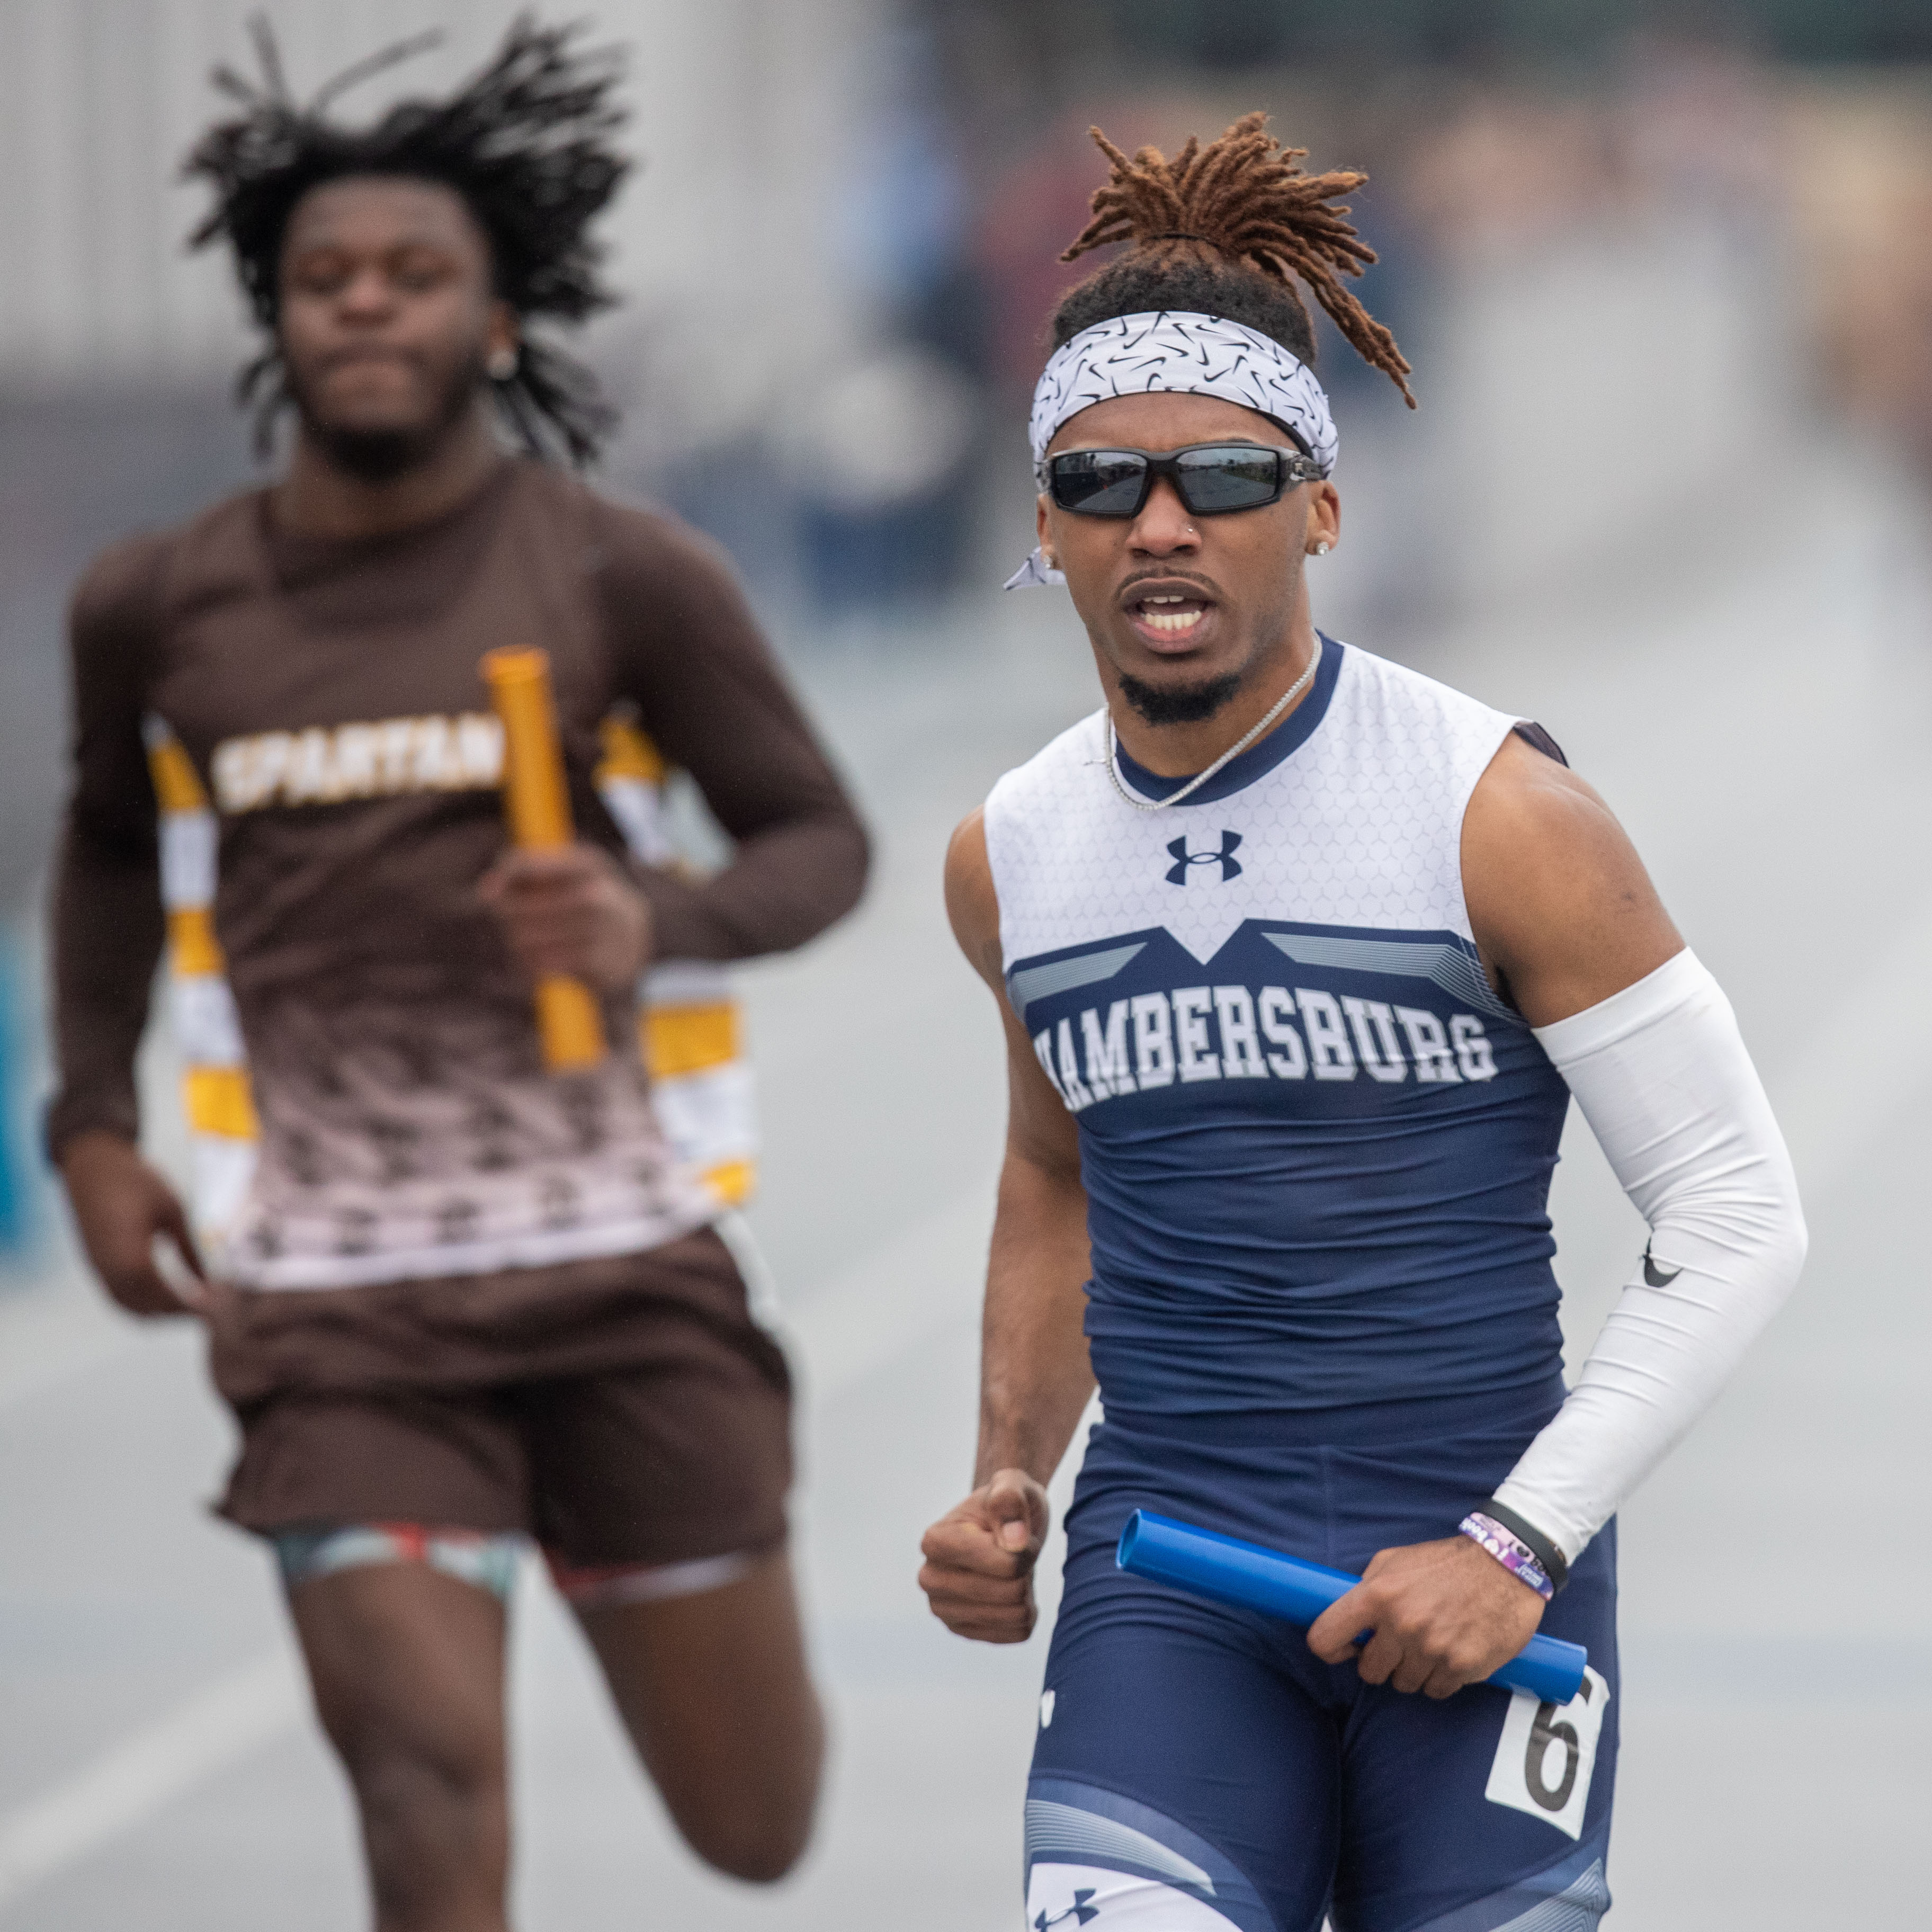 Chambersburg’s Antonio Harrison, right, anchors the winning 4 x 100 meter relay win at the 2023 Tim Cook Memorial Invitational track & field meet at Chambersburg, Pa., Mar. 25, 2023.Mark Pynes | pennlive.com